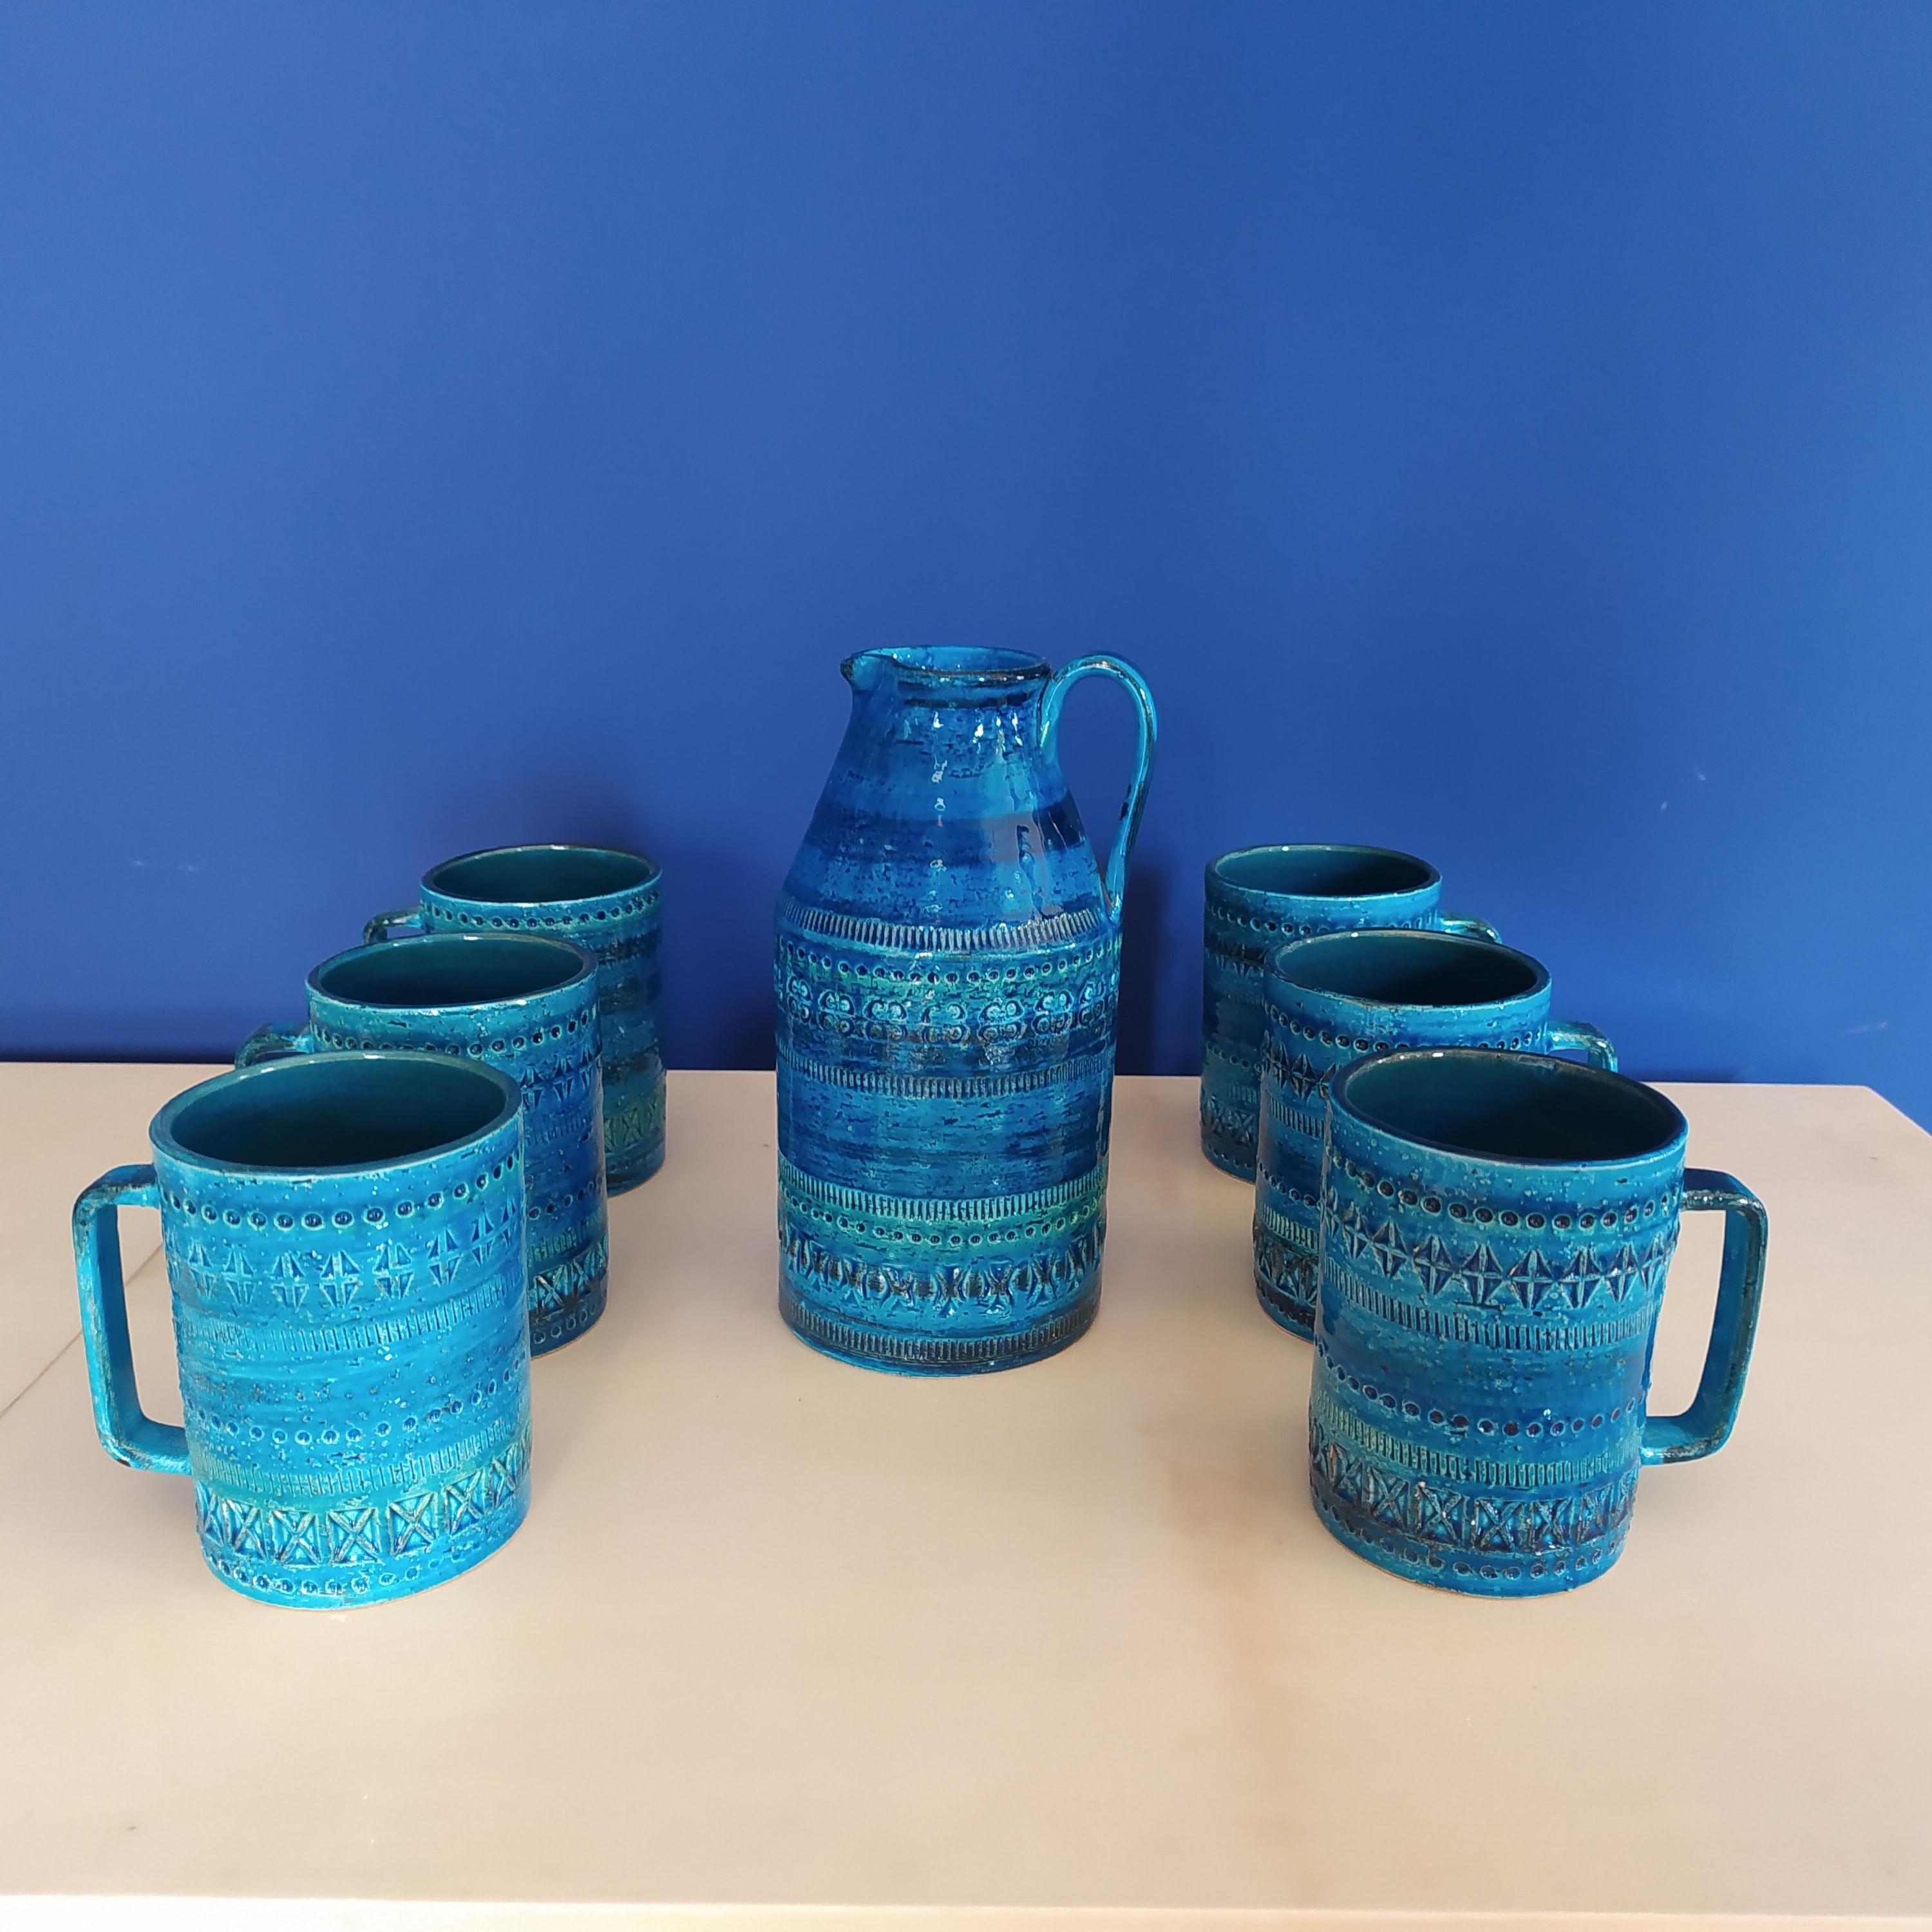 1960s set of a jug with six cups by Aldo Londi for Bitossi (Blue Collection) in ceramic. Made in Italy
The items are in excellent condition